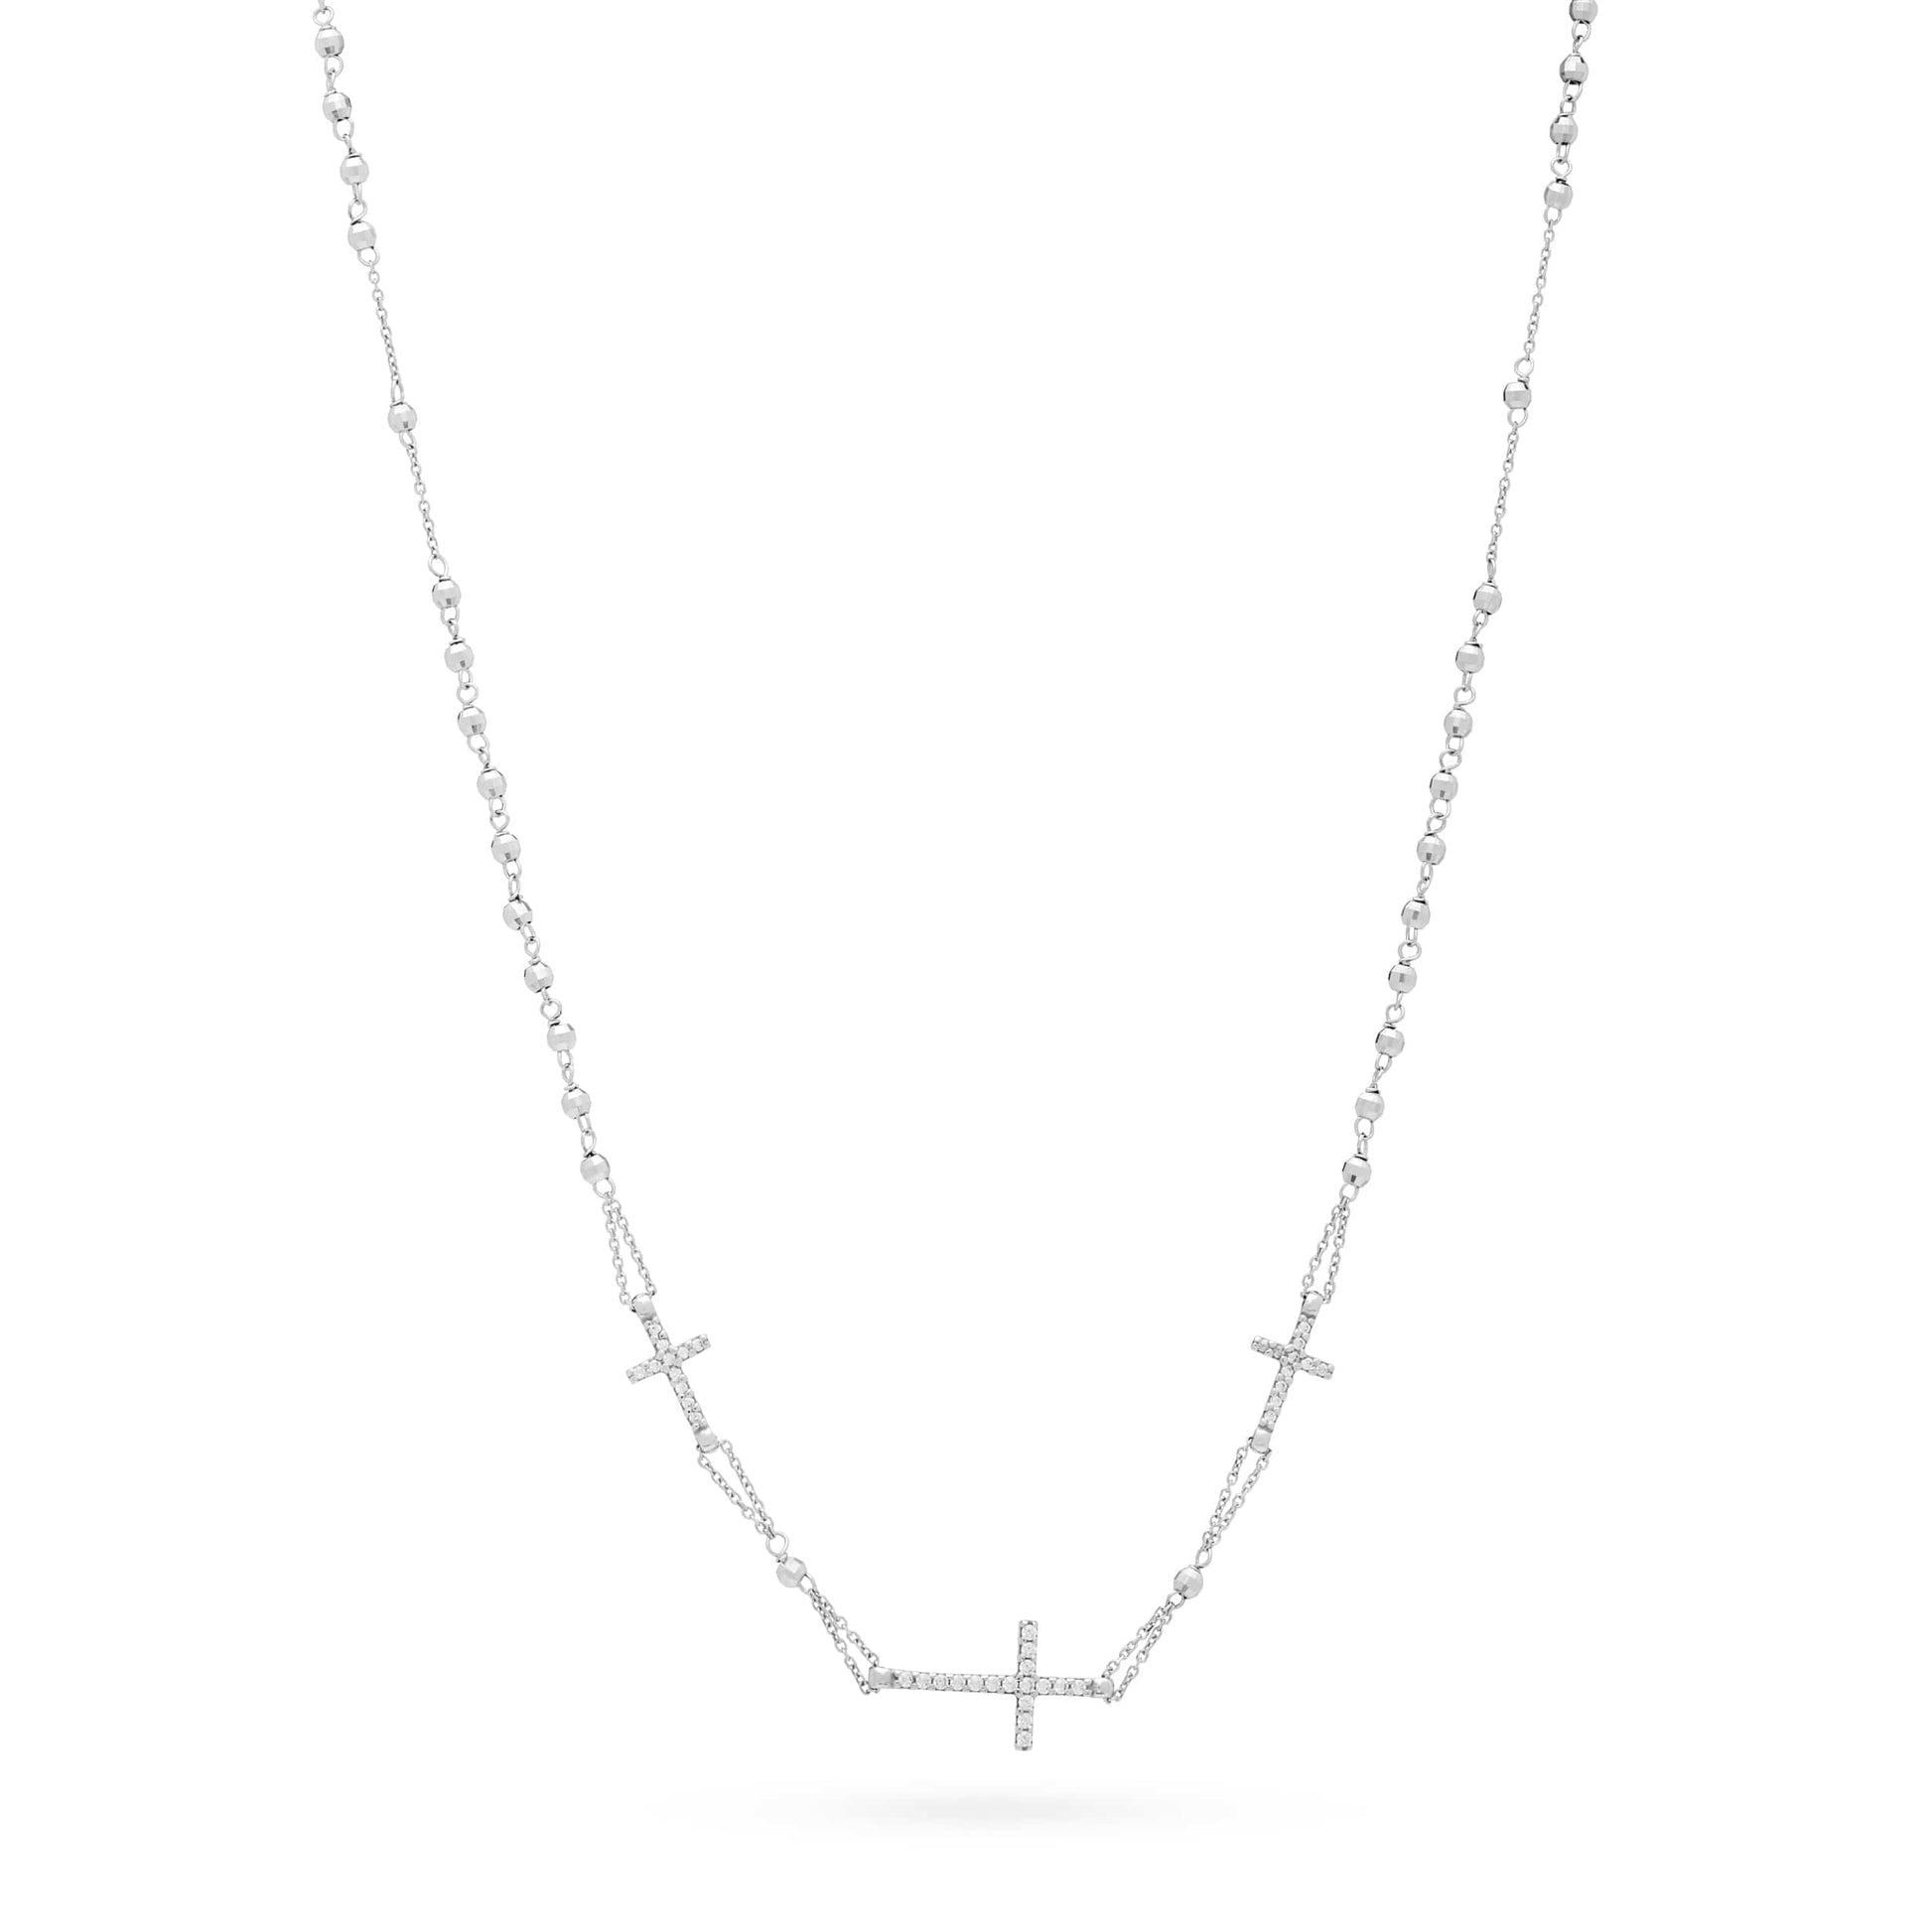 MONDO CATTOLICO Prayer Beads 22.5 cm (8.85 in) / 2 mm (0.07 in) White Gold Rosary Beads Necklace Three Crosses